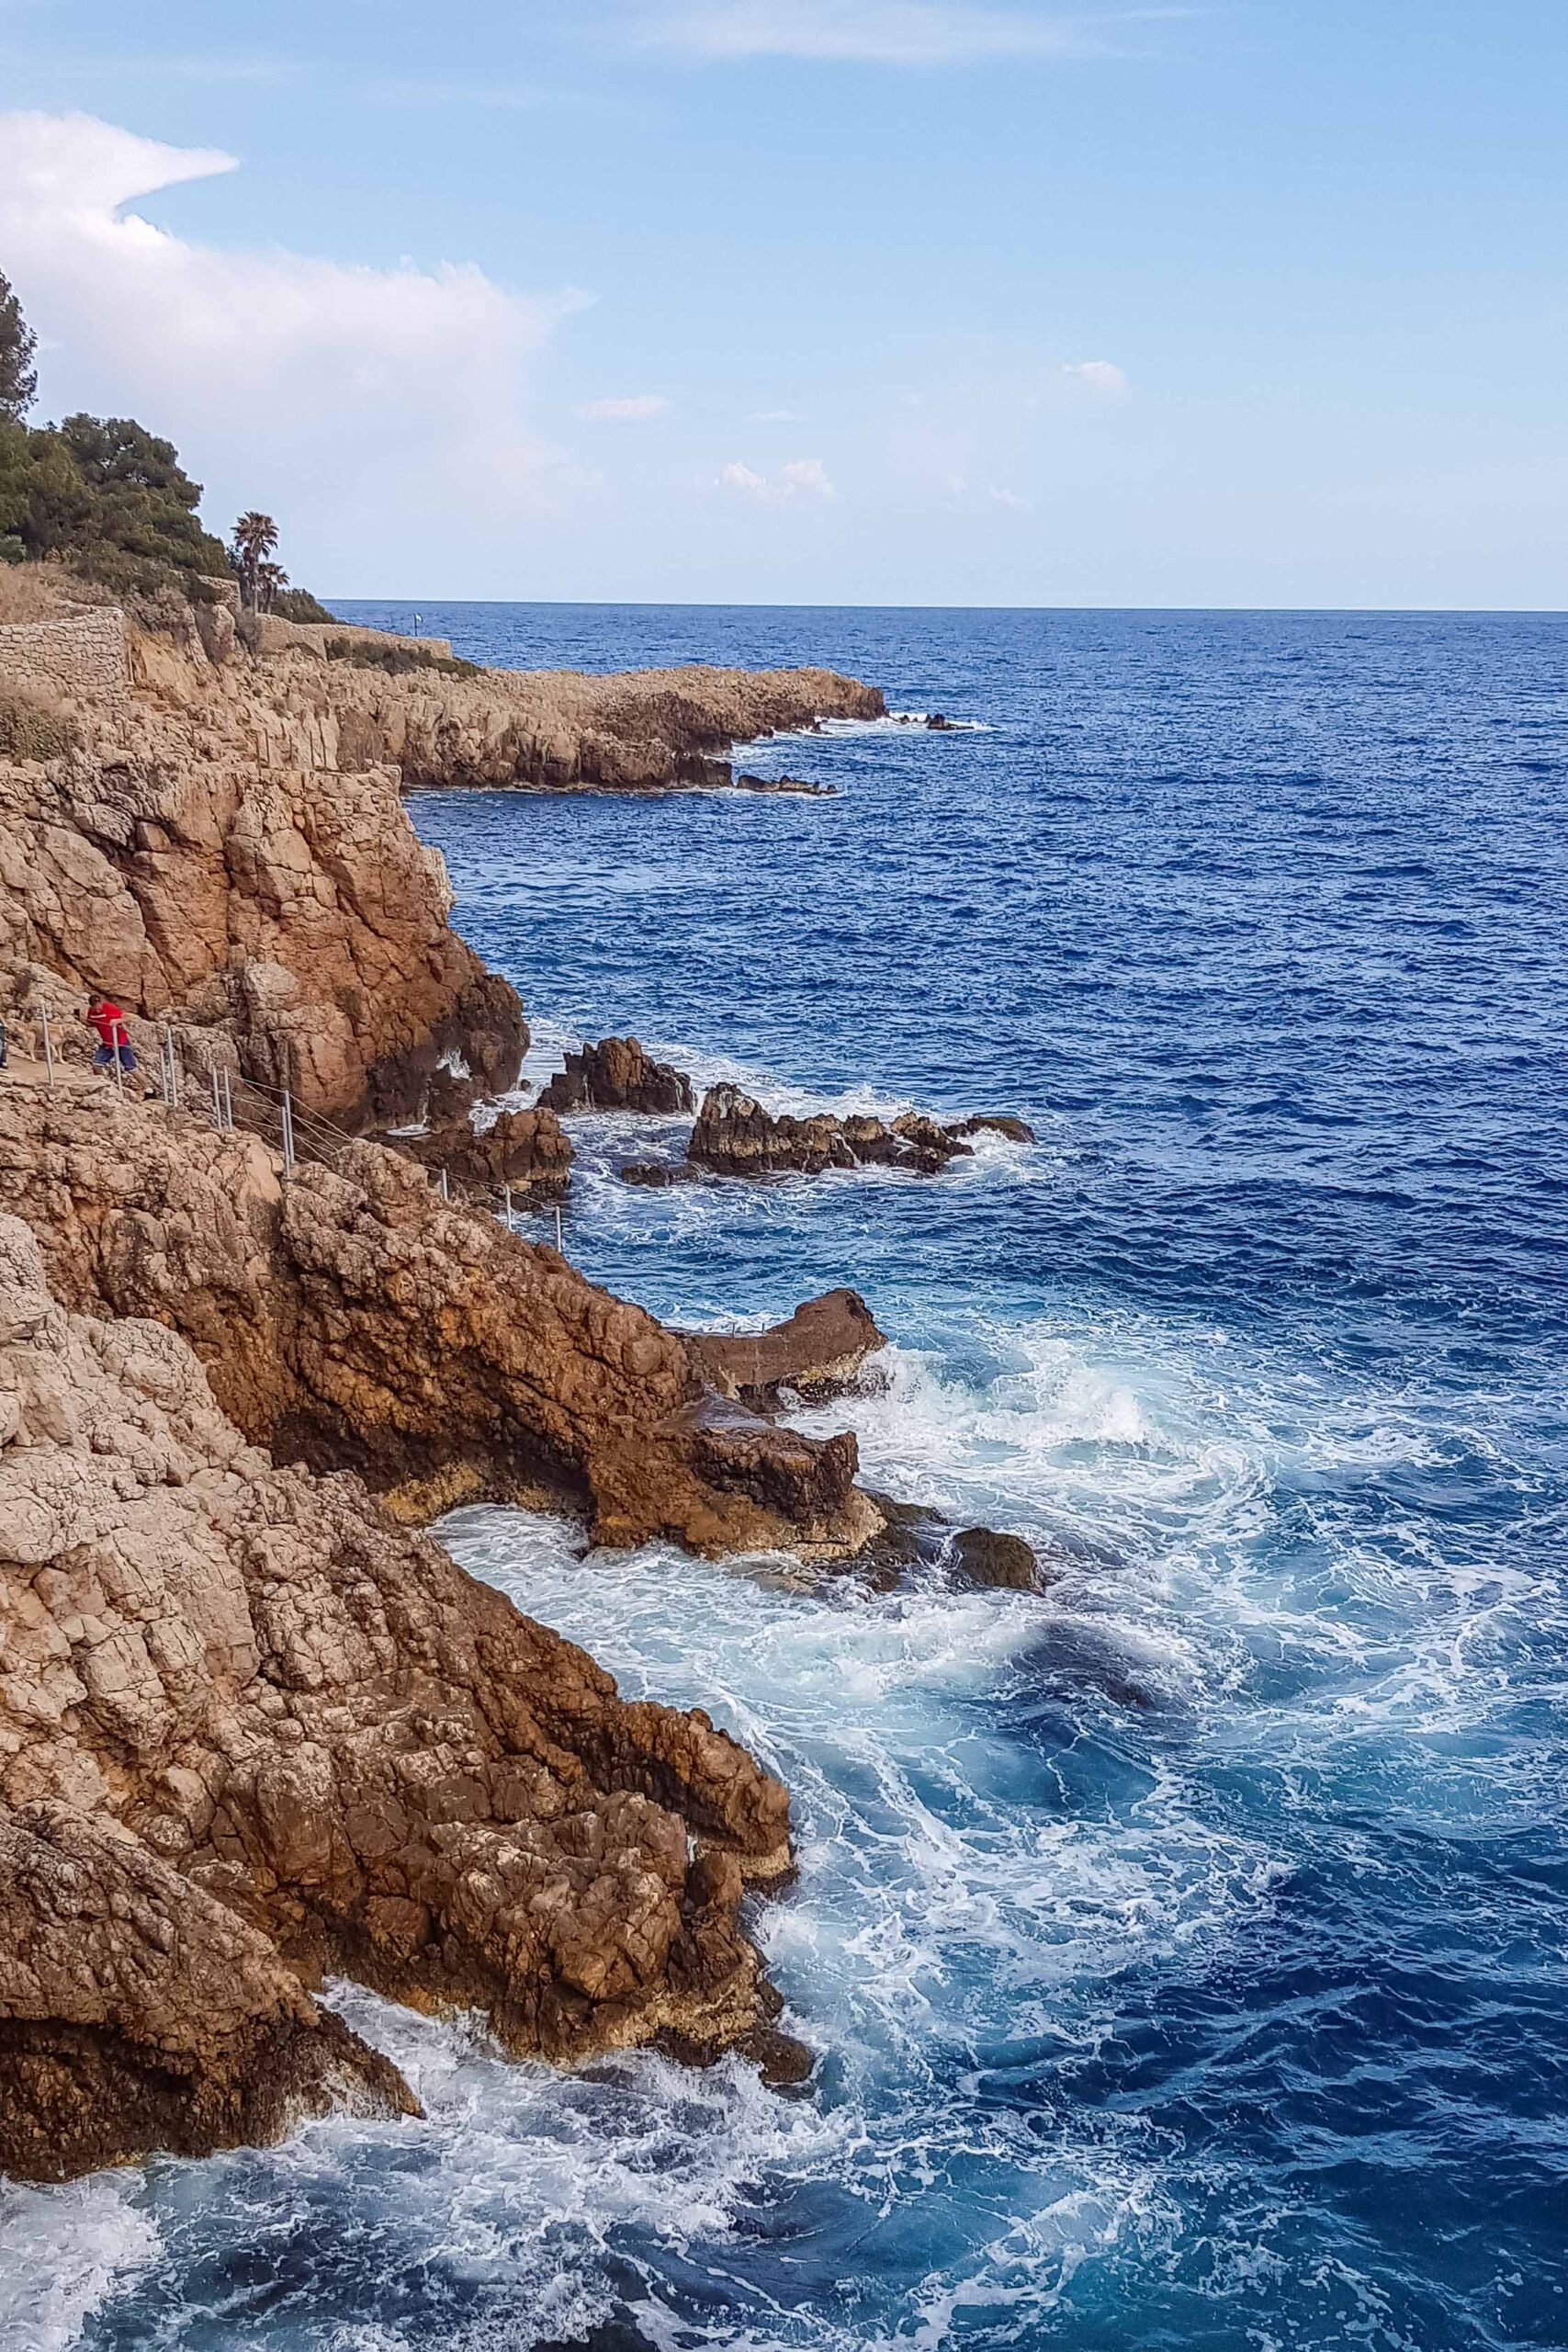 Rock cliffs and view of the Mediterranean Sea along the Sentier du Littoral hiking trail during a sunny day in Antibes, France